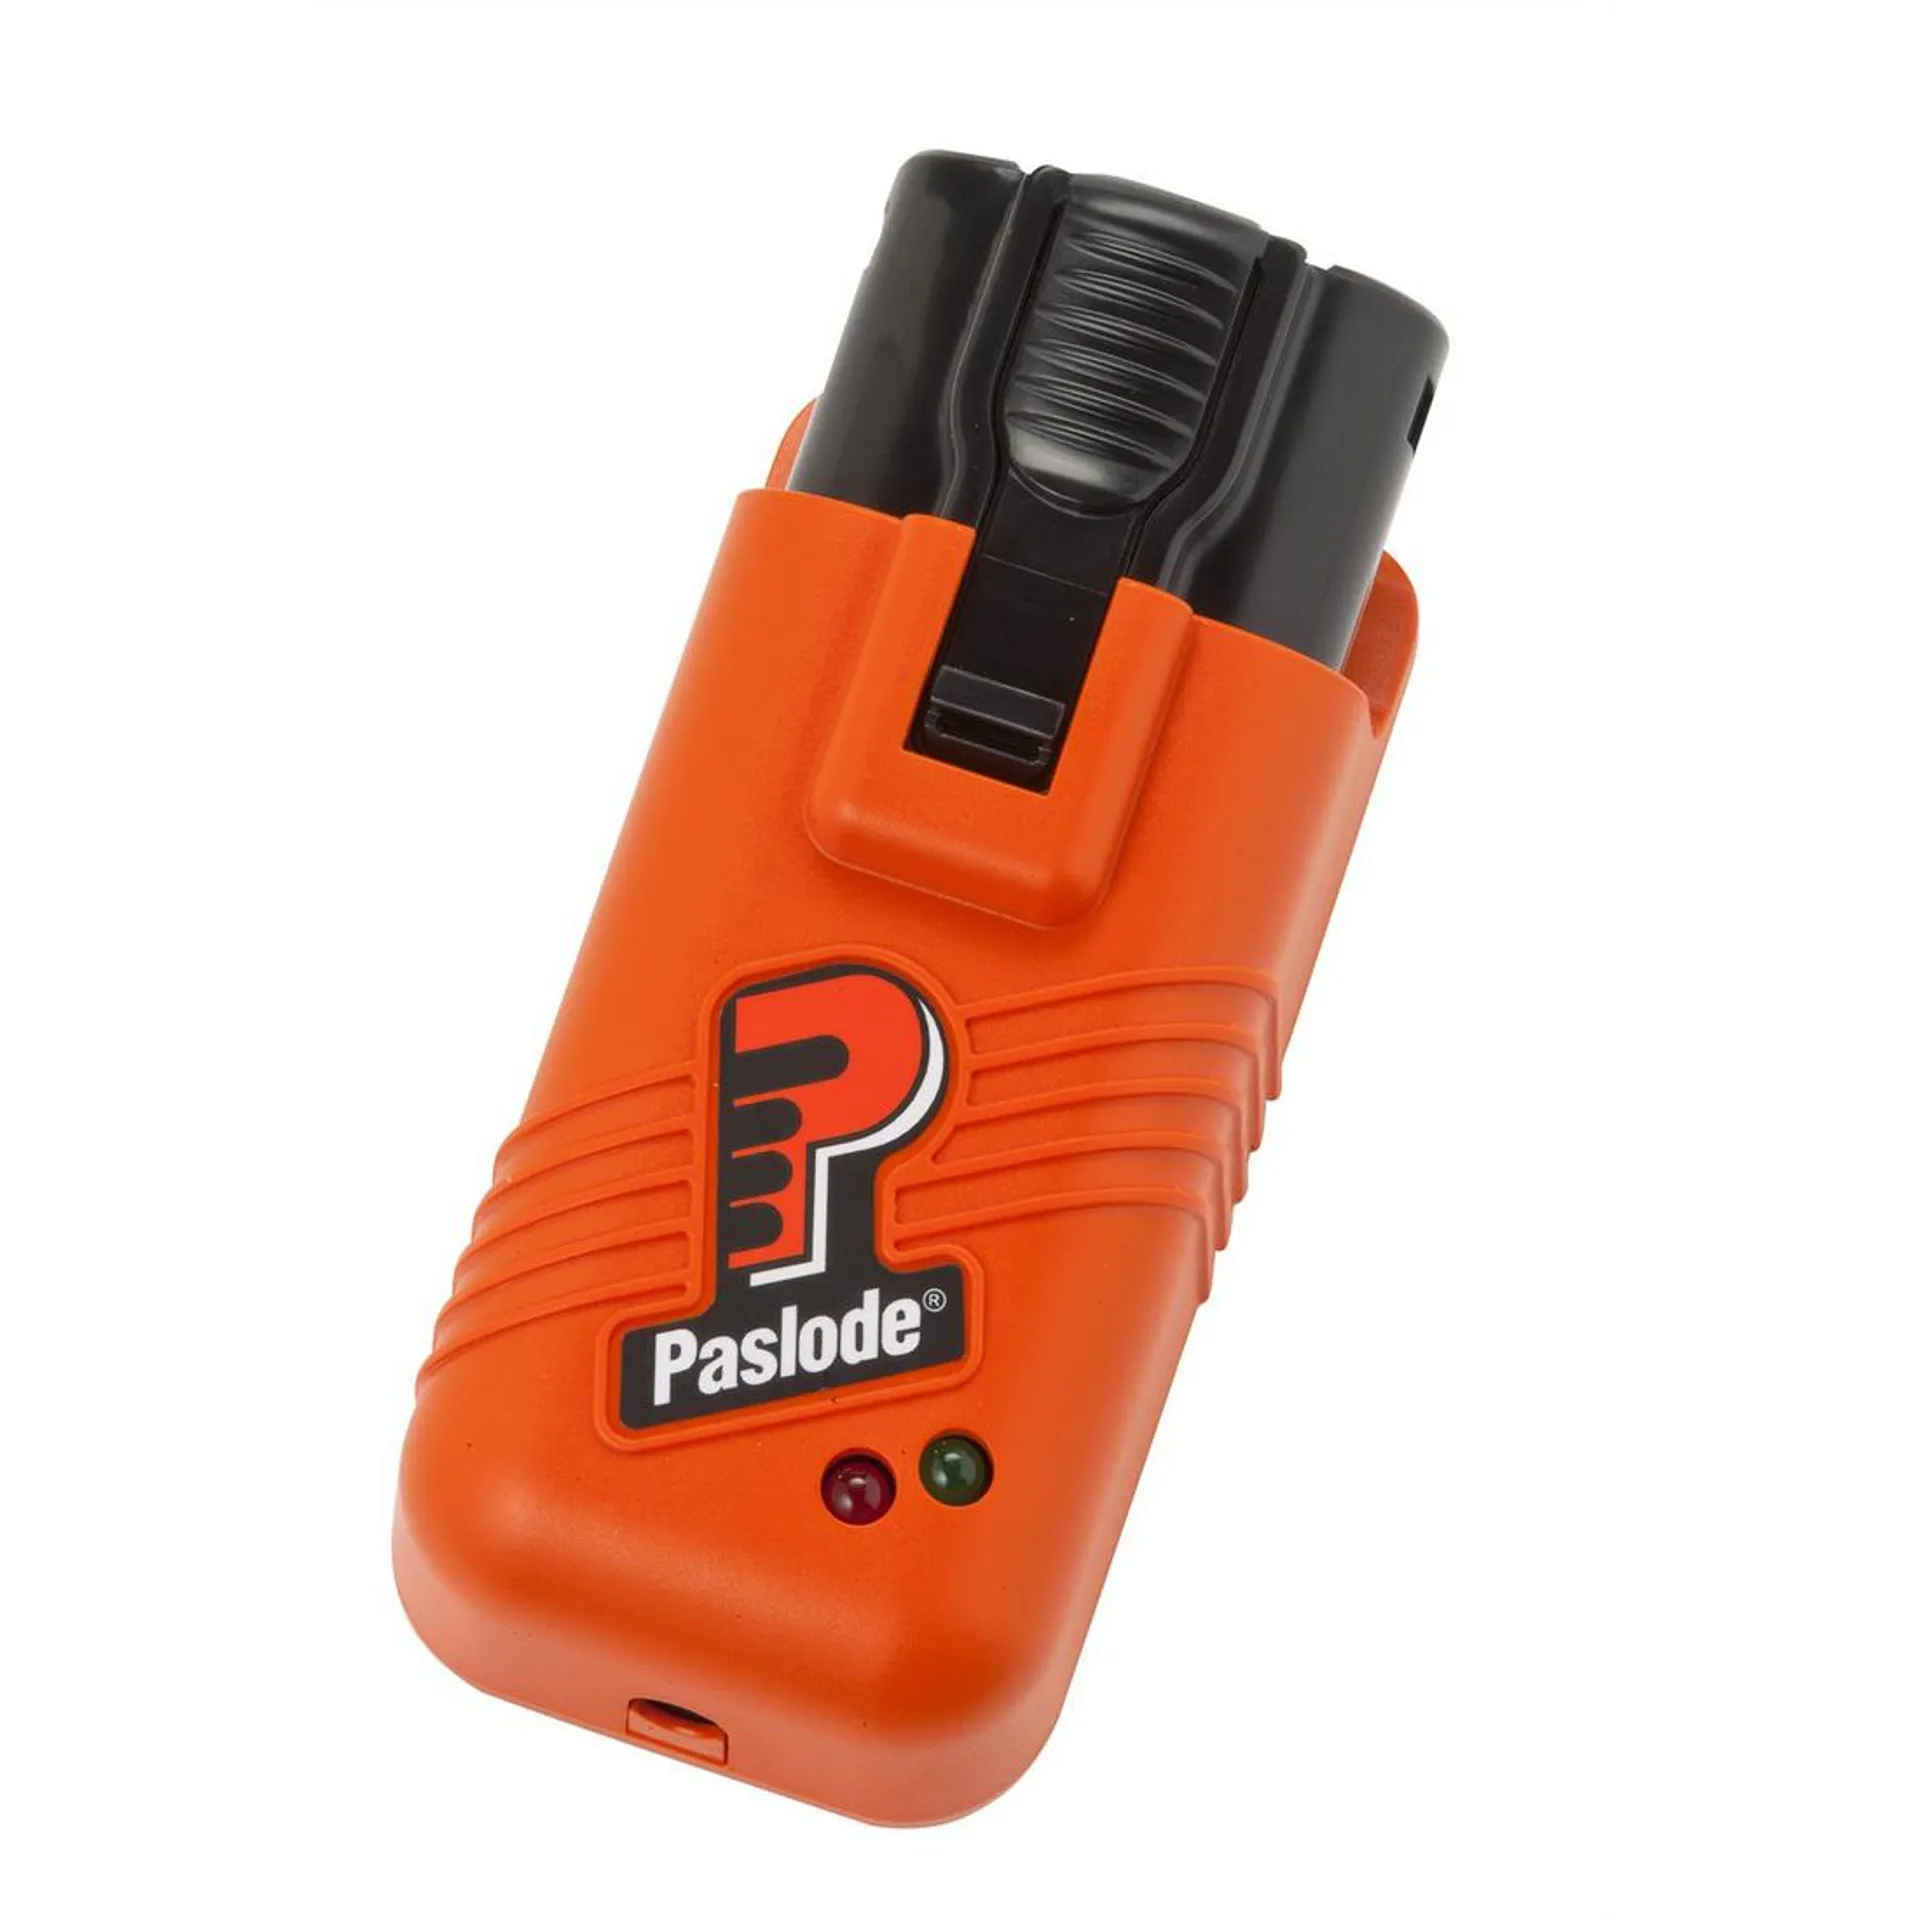 Impulse Lithium-Ion Tool Battery Charger Kit